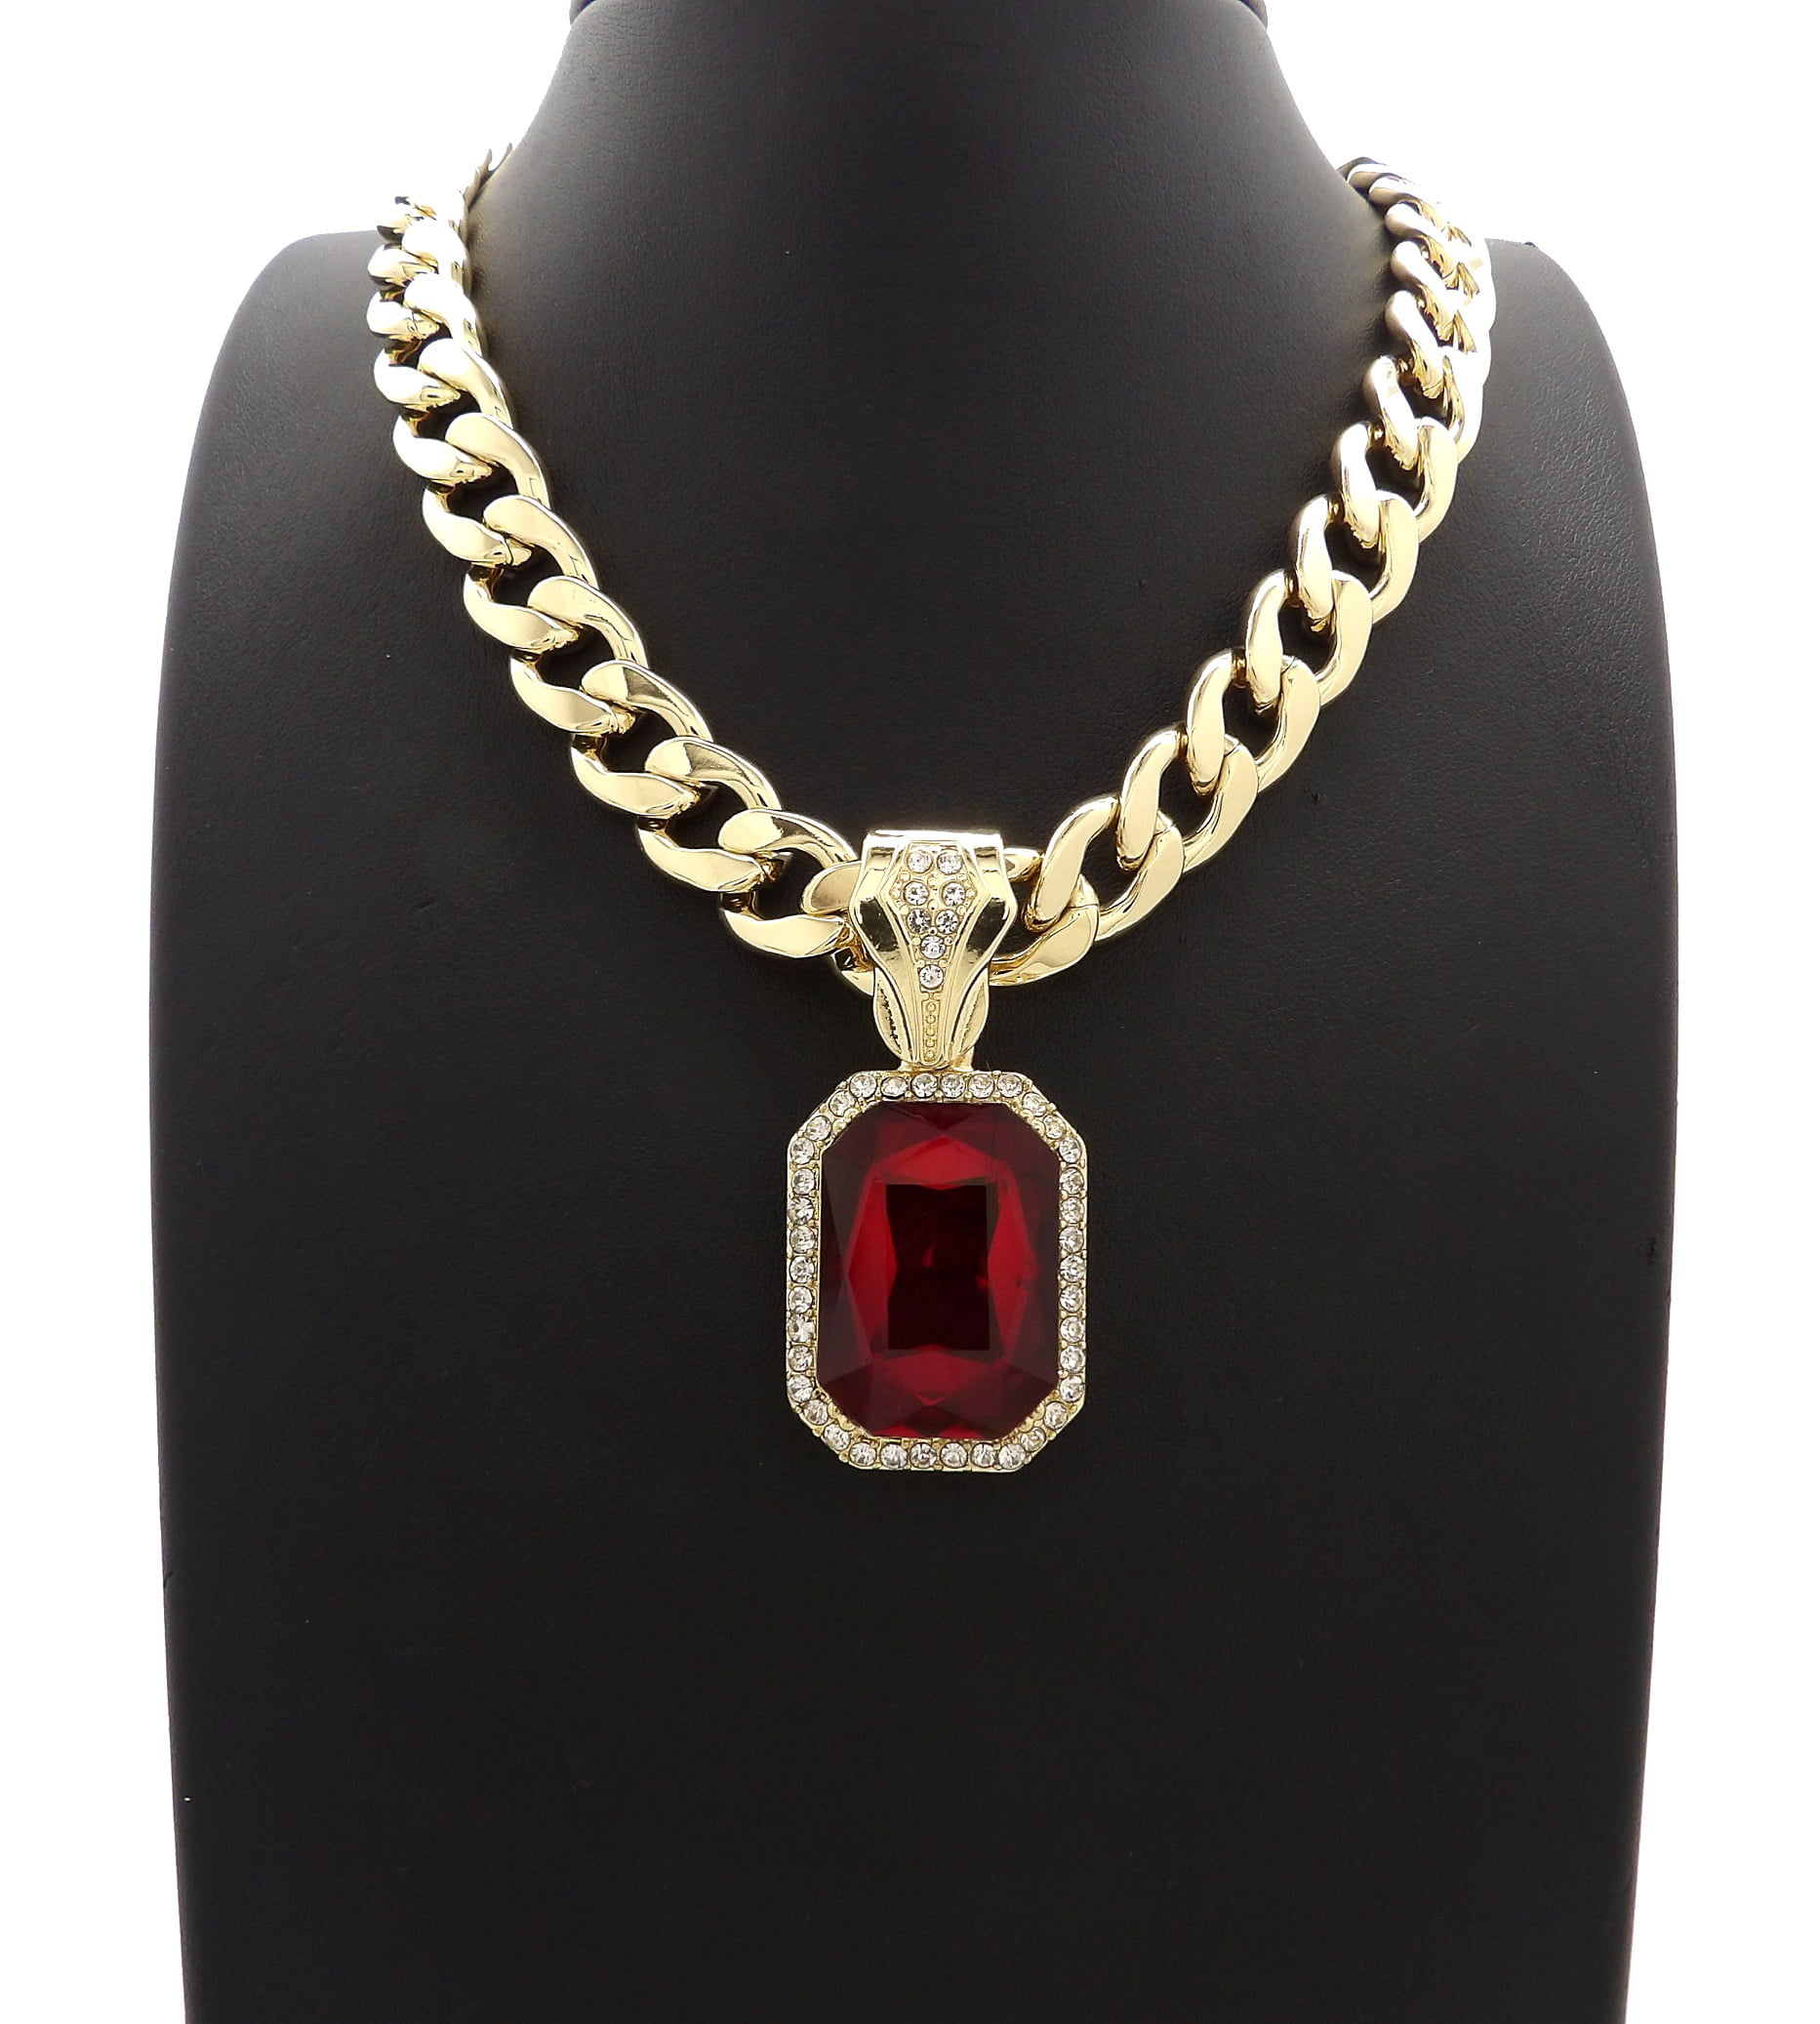 Men's Iced 14k Gold Plated Red Ruby CZ Pendant 24" Chain Necklace KC 7966 GRD